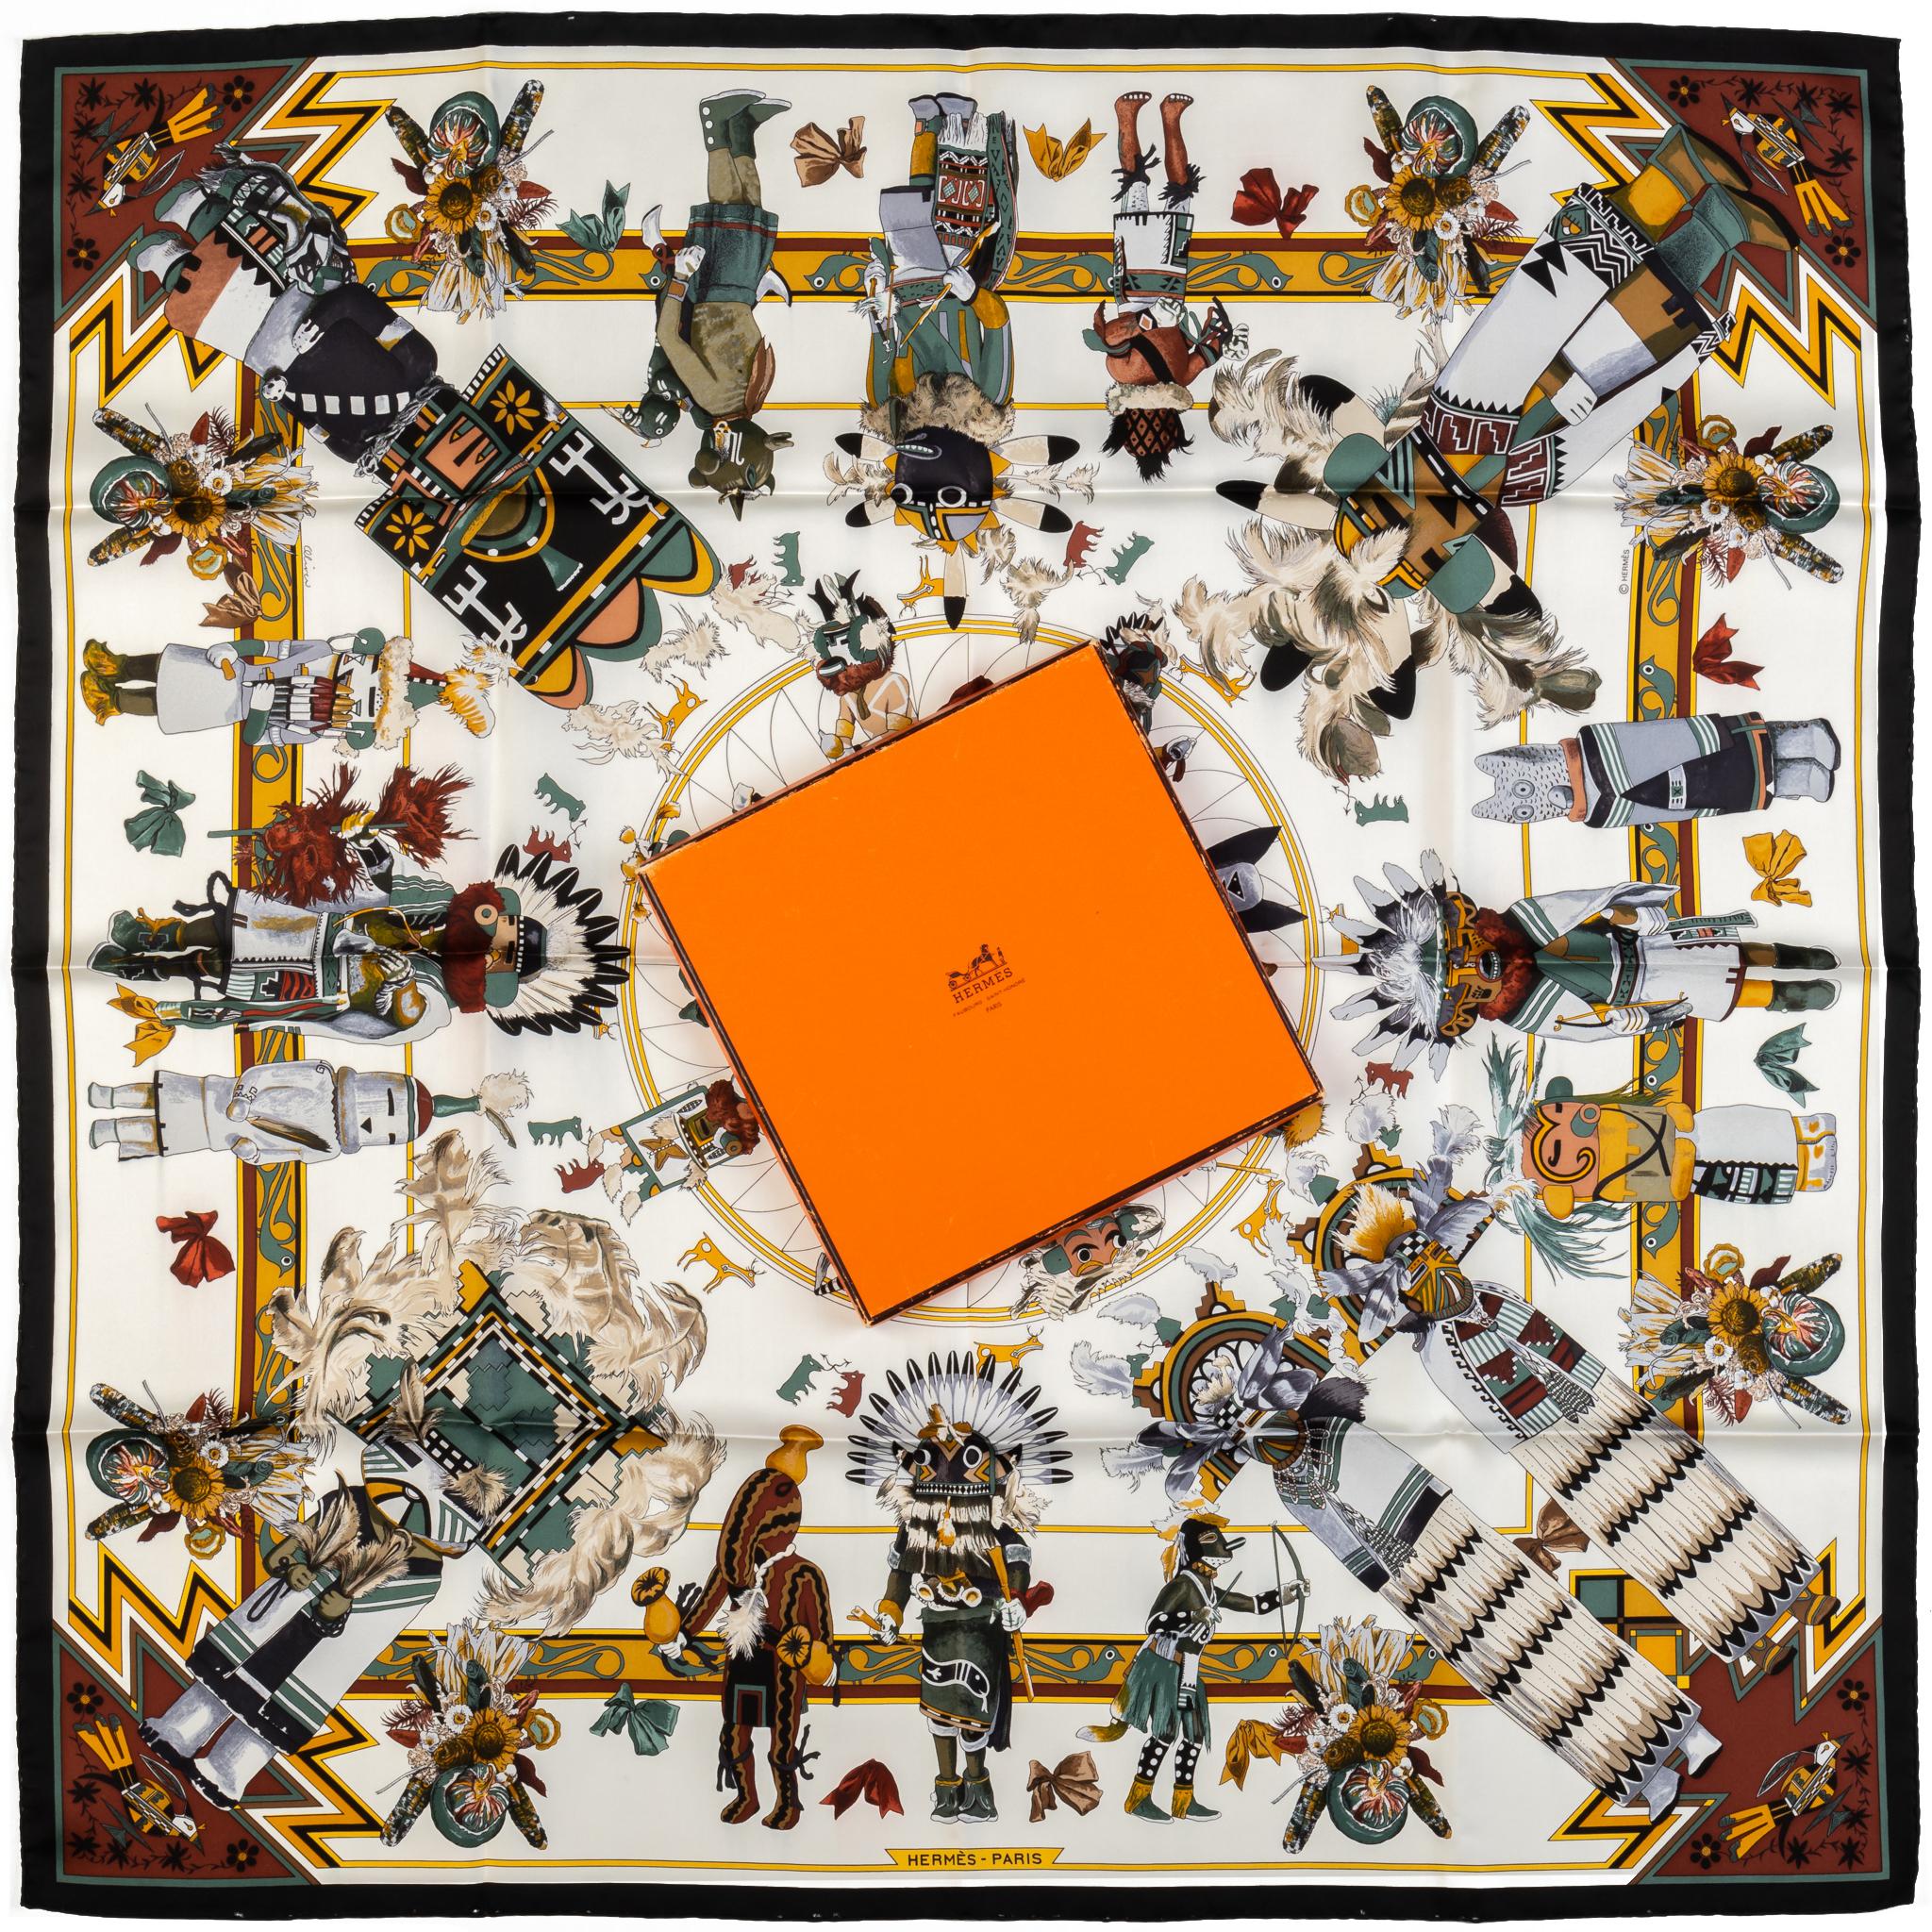 Signature Hermès silk twill Kachinas scarf designed by Kermit Oliver. Very collectible series. Hand rolled edges in a 35